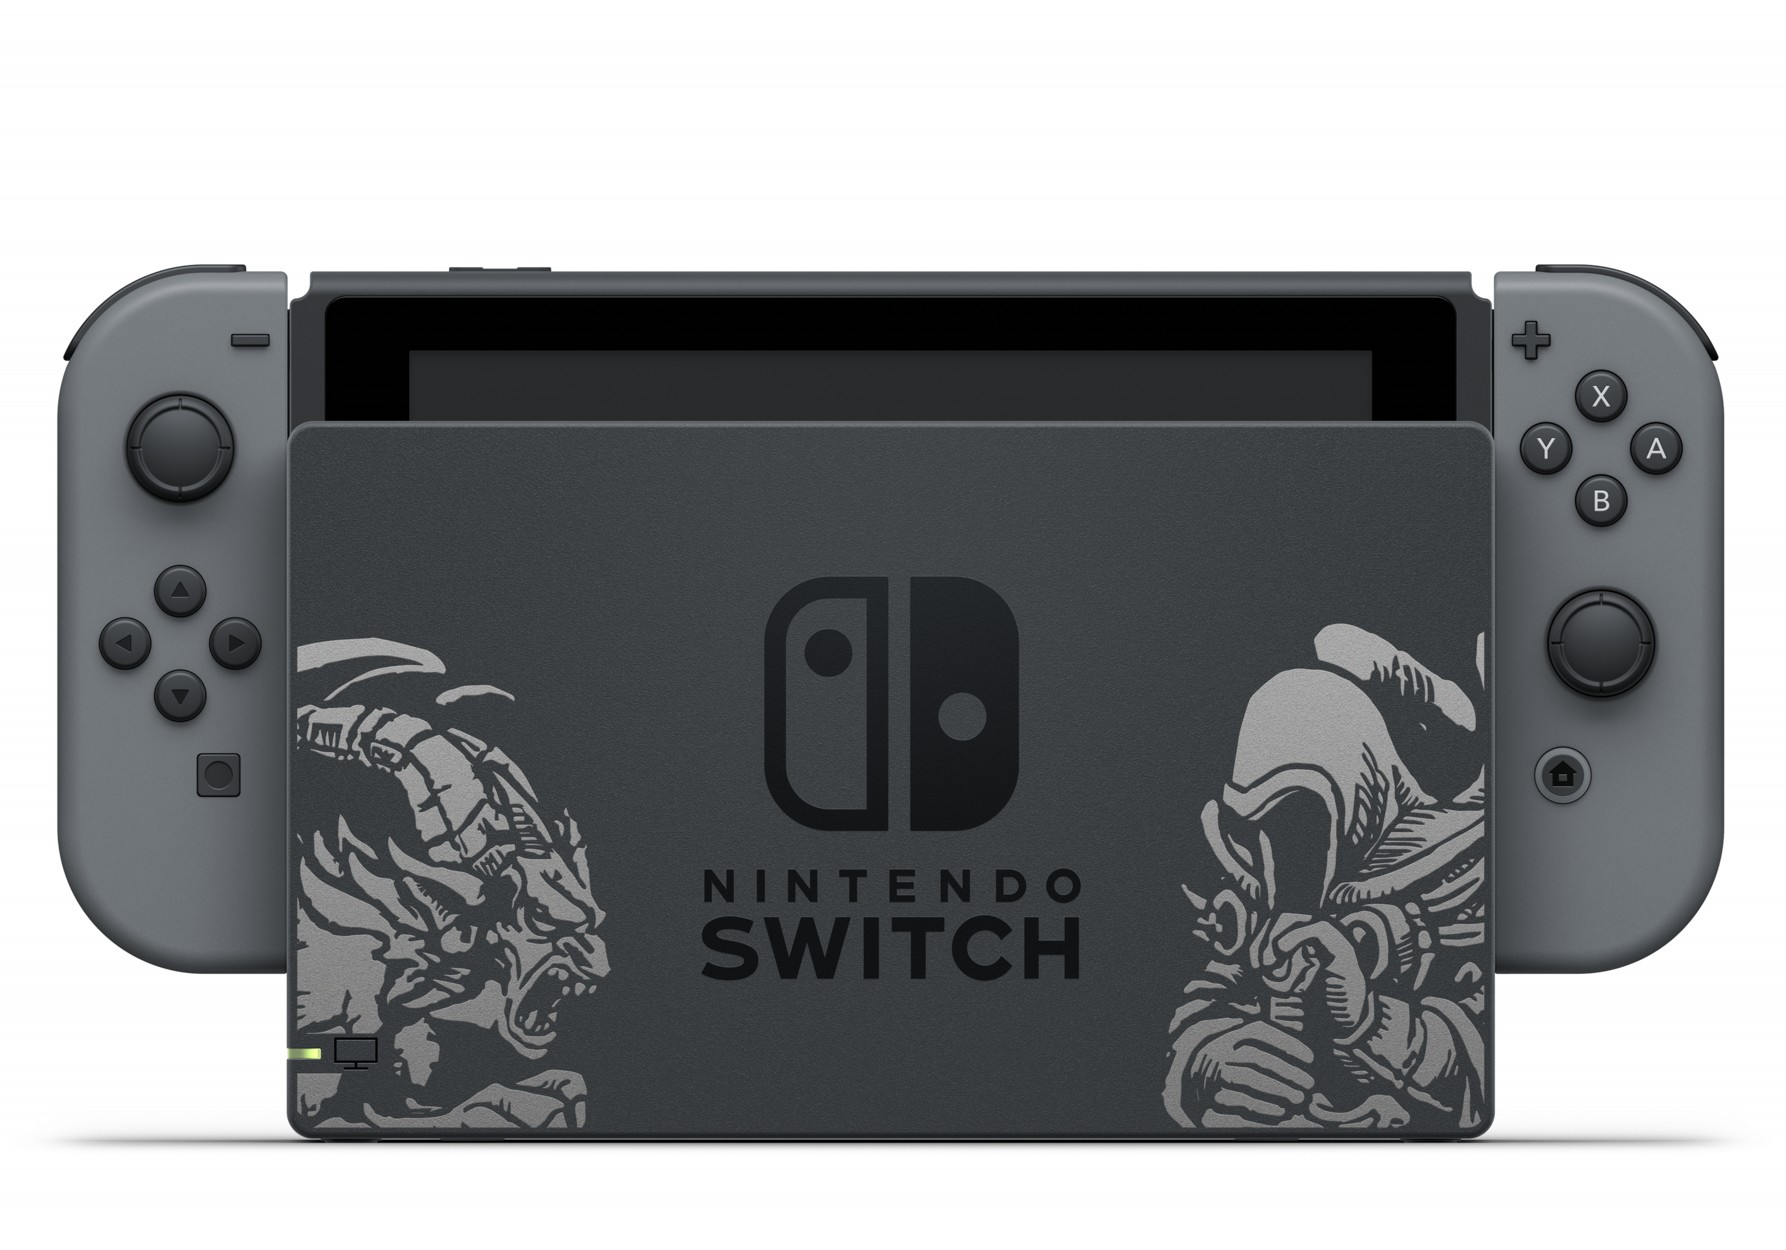 incident Flourish Immersion Photos of the Diablo III: Eternal Collection Switch bundle